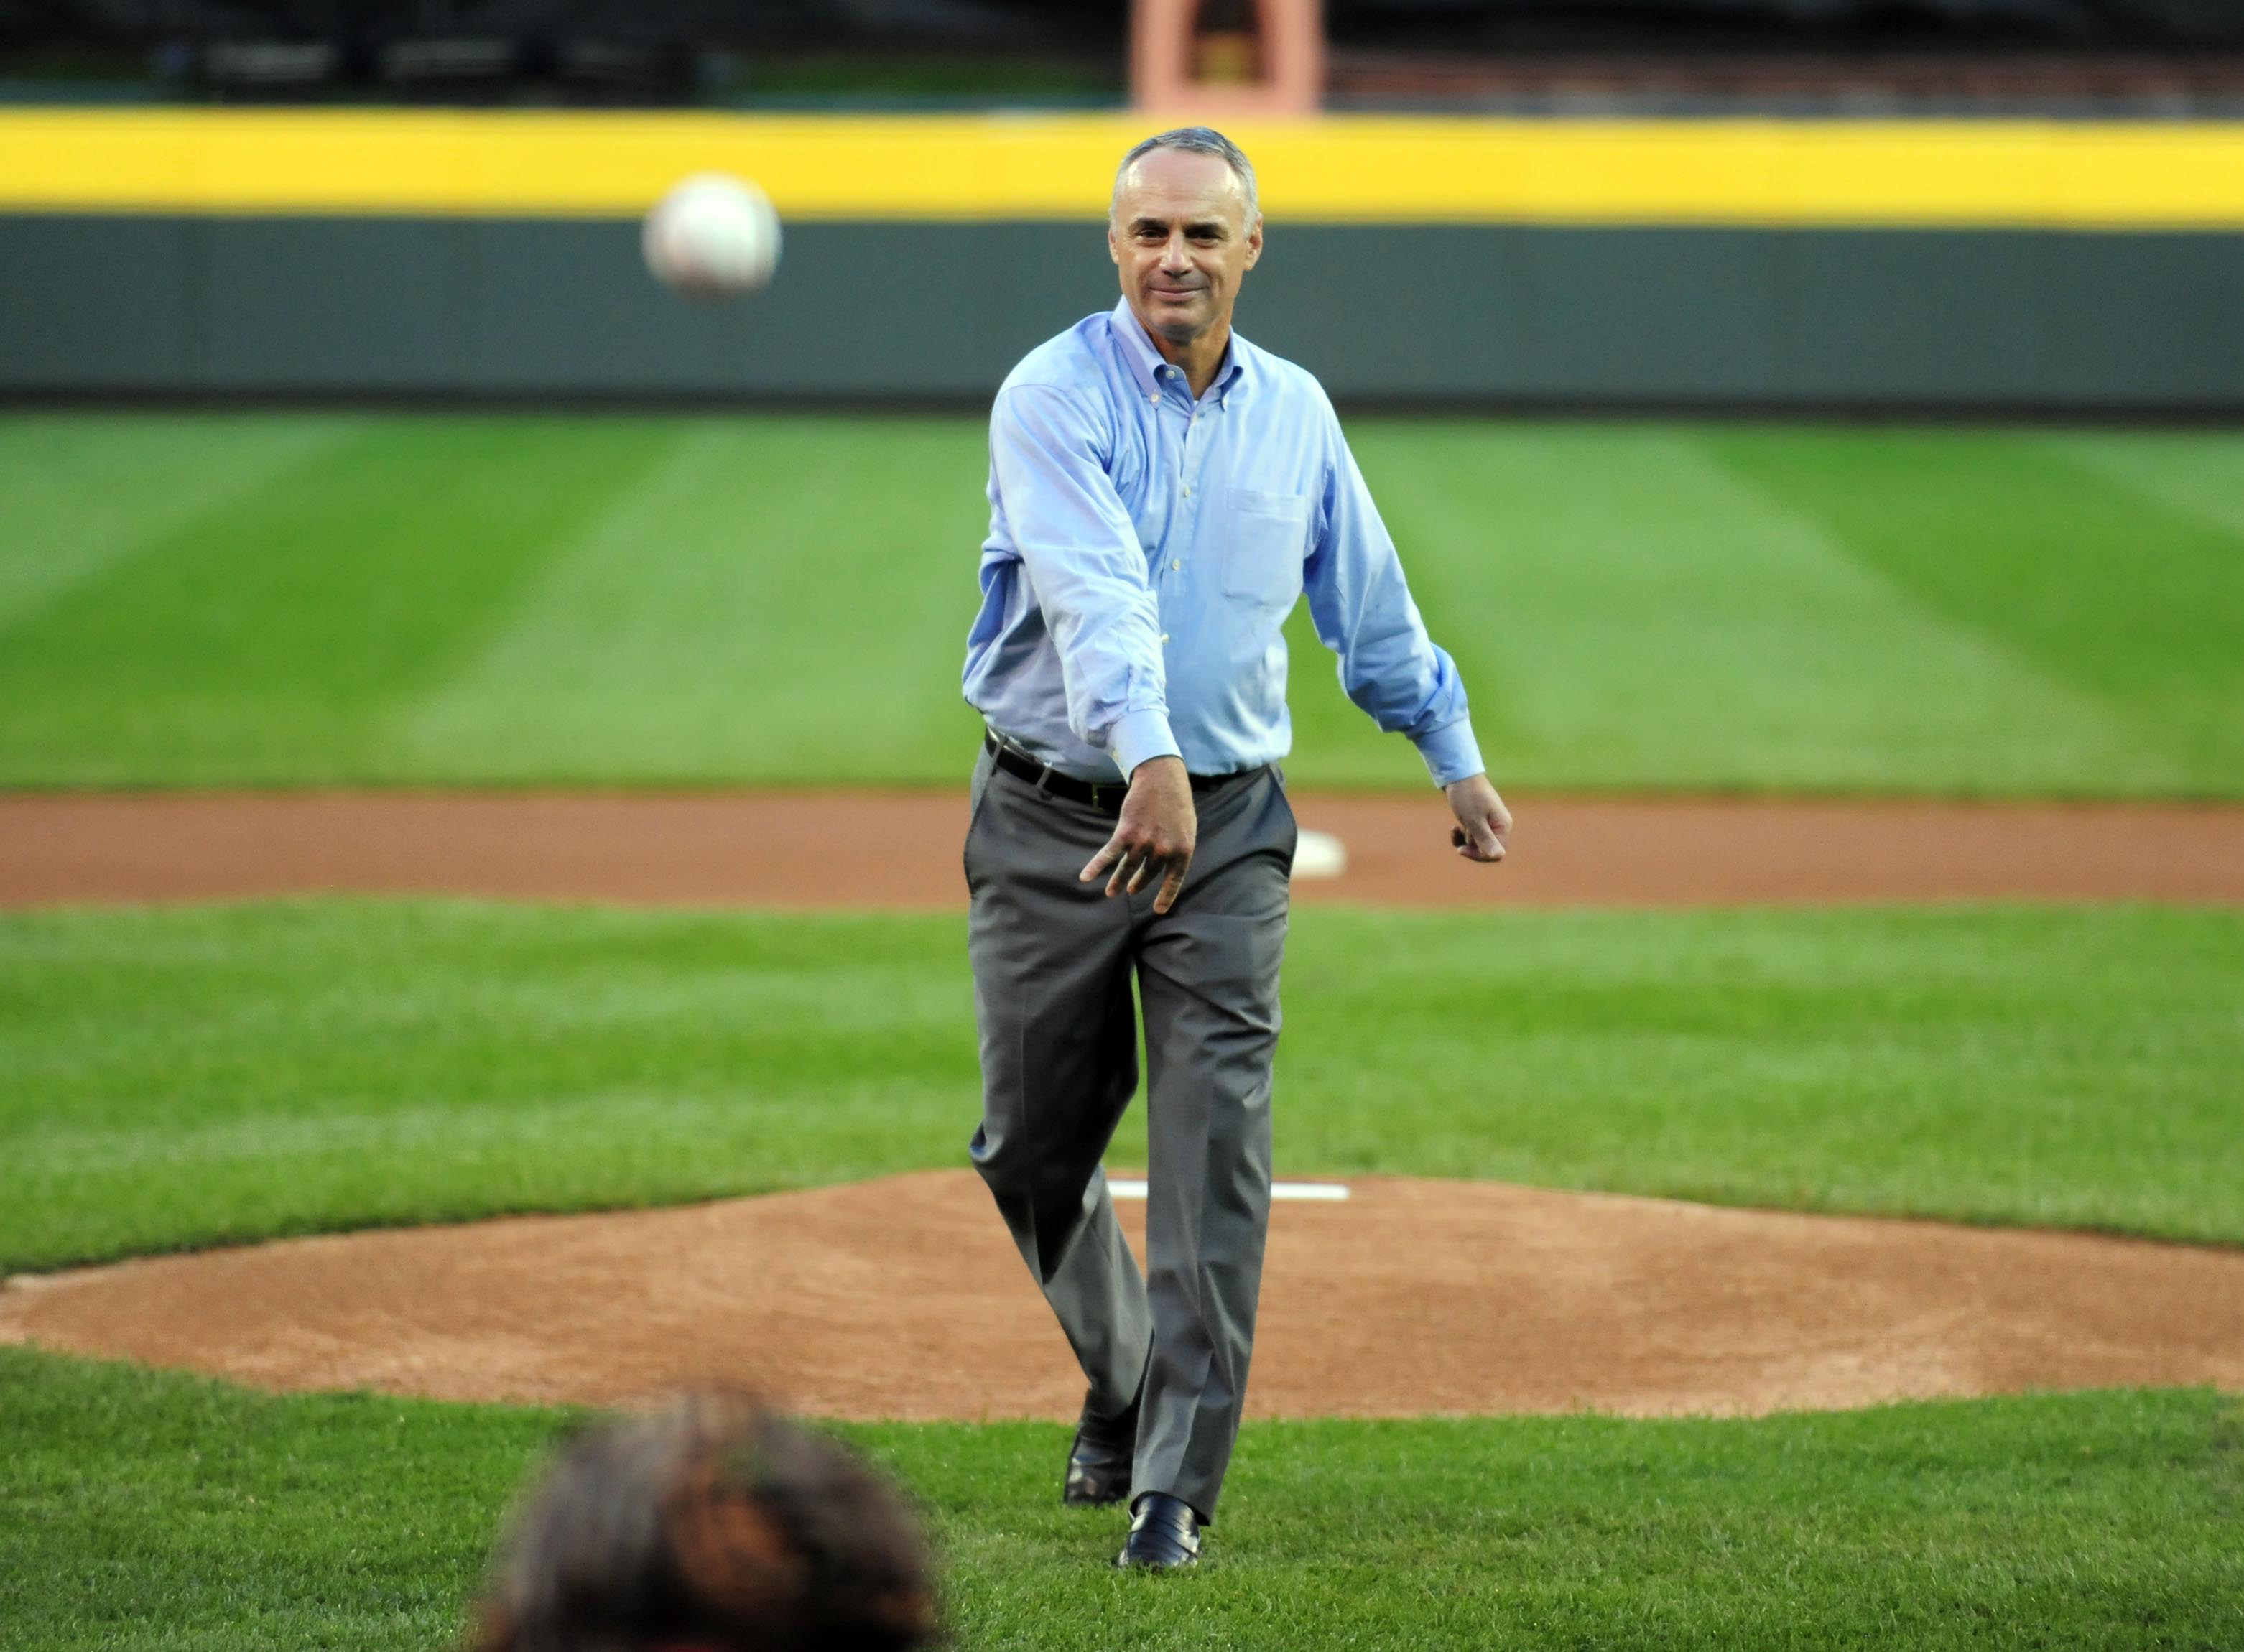 New MLB commissioner Rob Manfred will be a featured panelist at this year's conference.